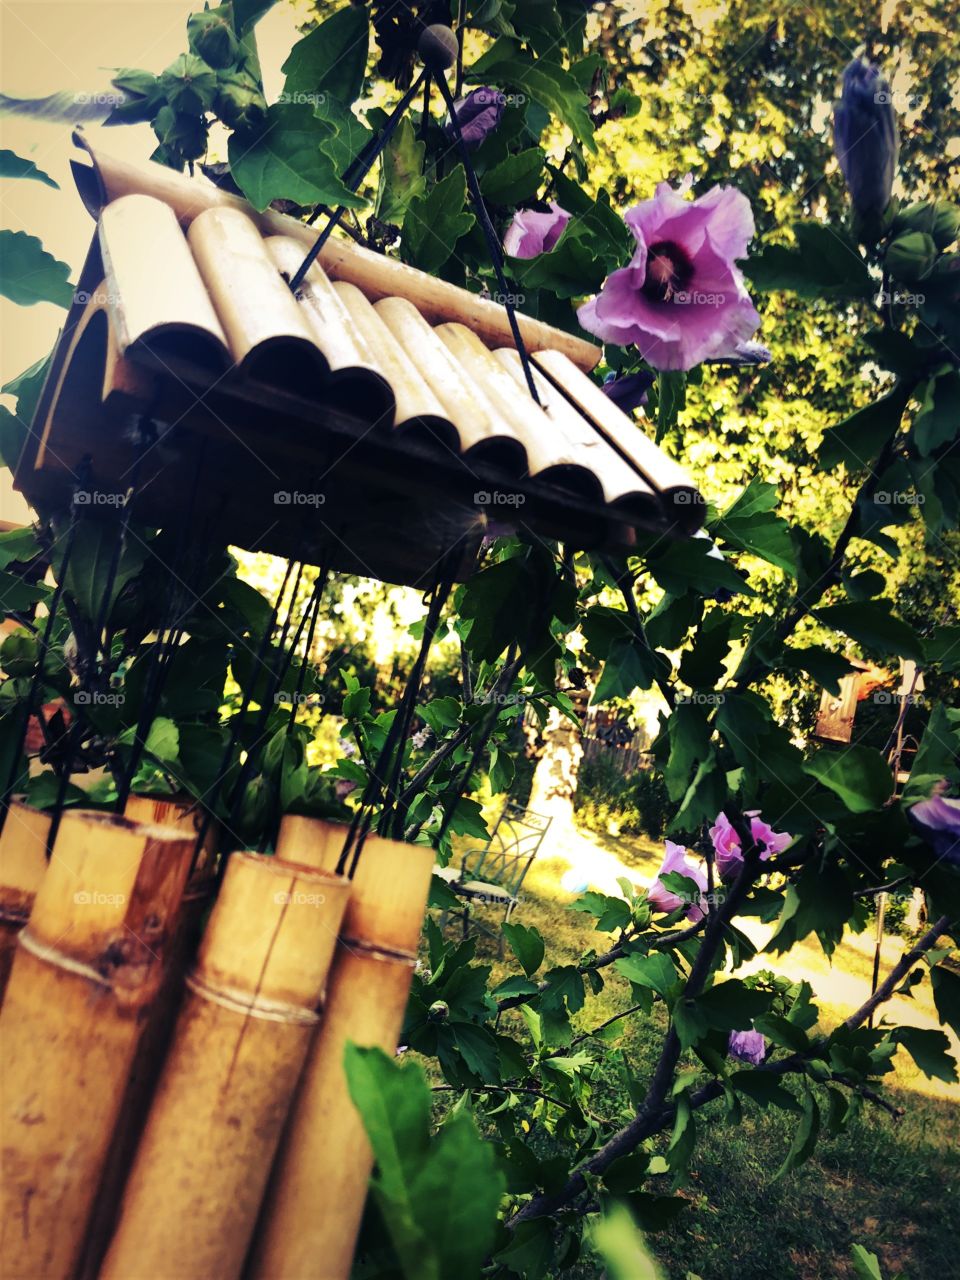 The breeze twists the wind chimes into a song. 